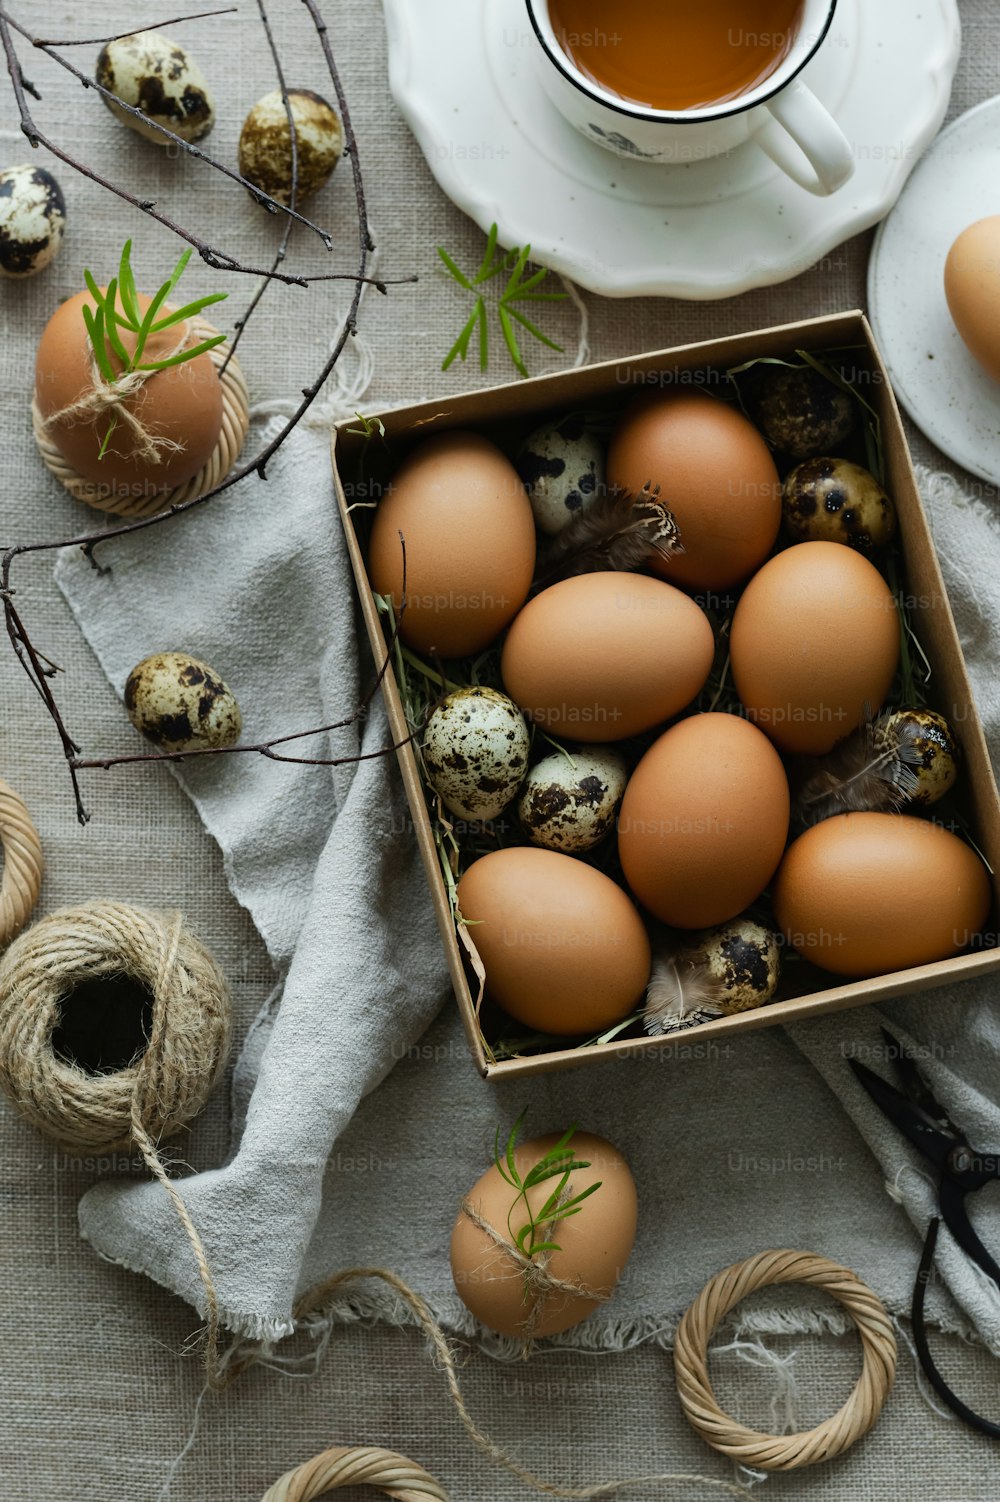 a box of eggs sitting next to a cup of tea